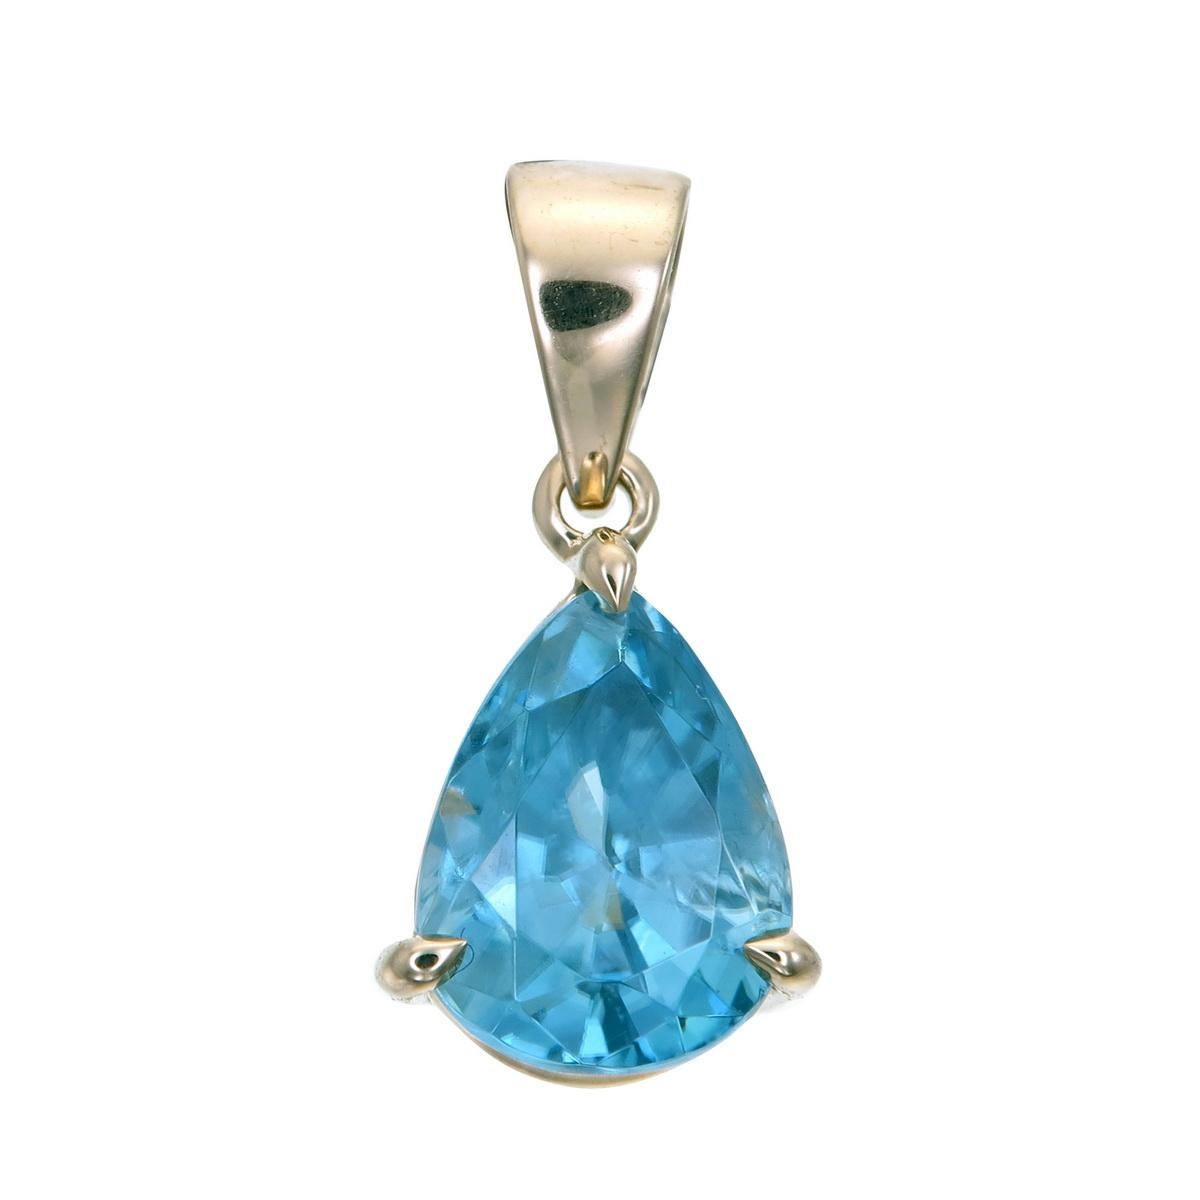 14 Karat Yellow Gold Pendant set with a 2.5. carat Natural Blue Zircon.
Featured on this piece is a metallic blue zircon mined, cut and polished in Ratanakiri, Cambodia.
The soothing light blue contrasts sensationally with the stark bright yellow